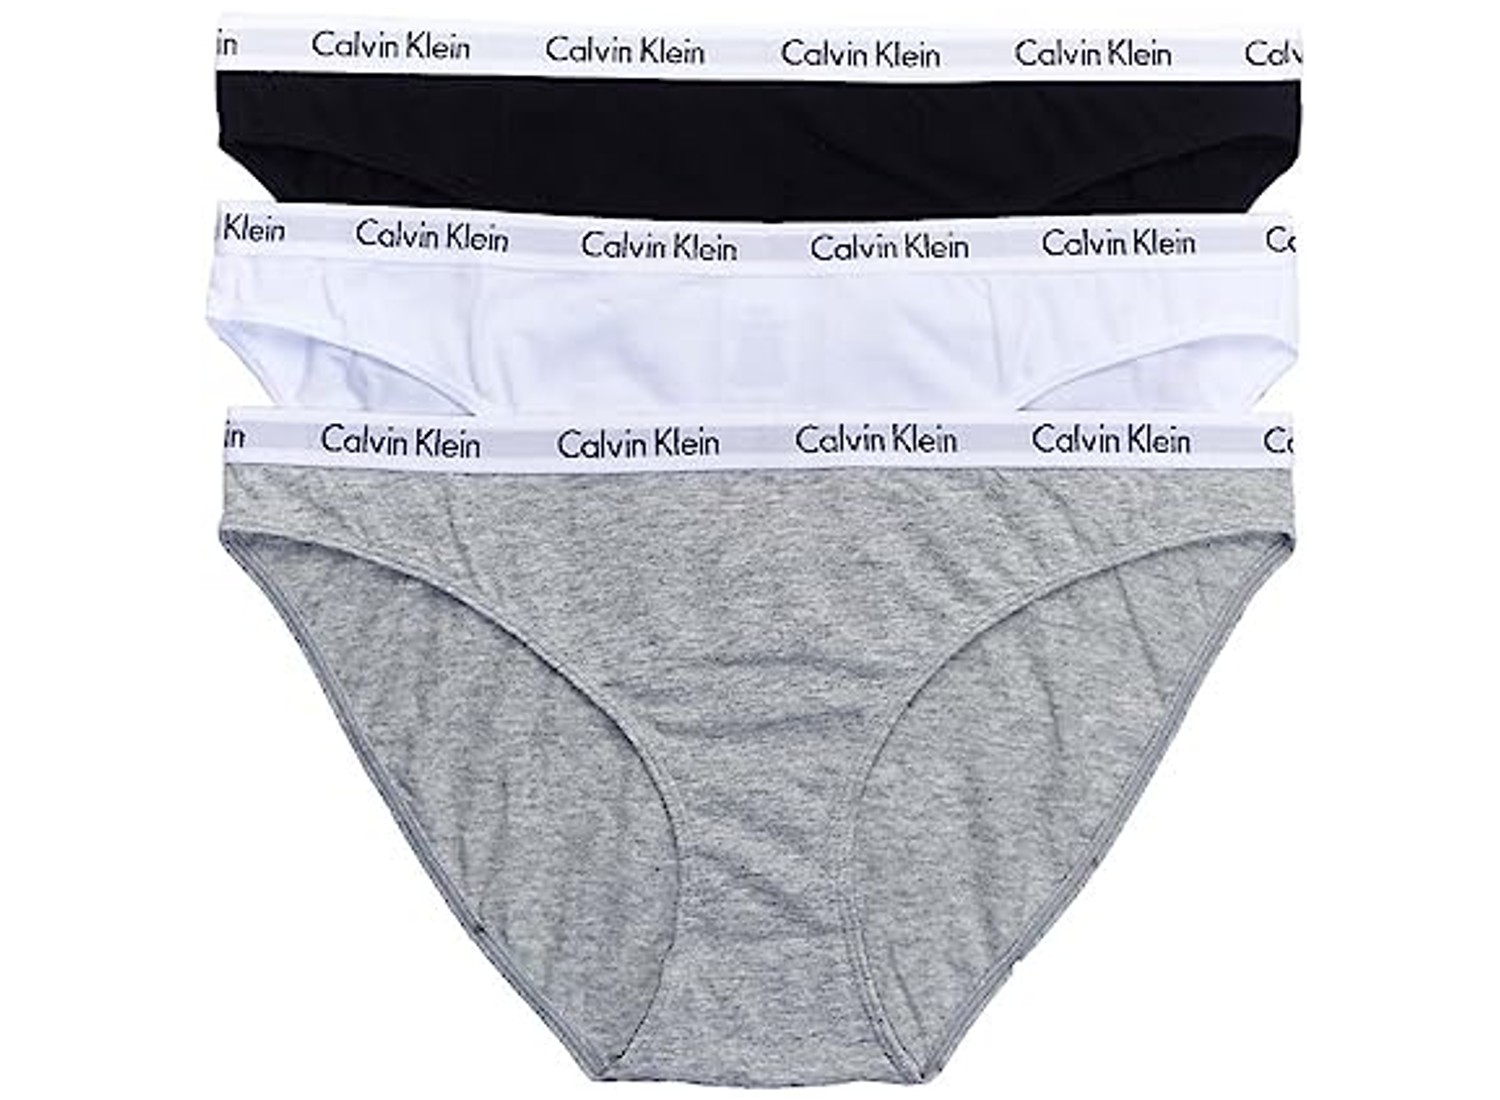 Calvin Klein undergarments are over 50% off for Prime Day